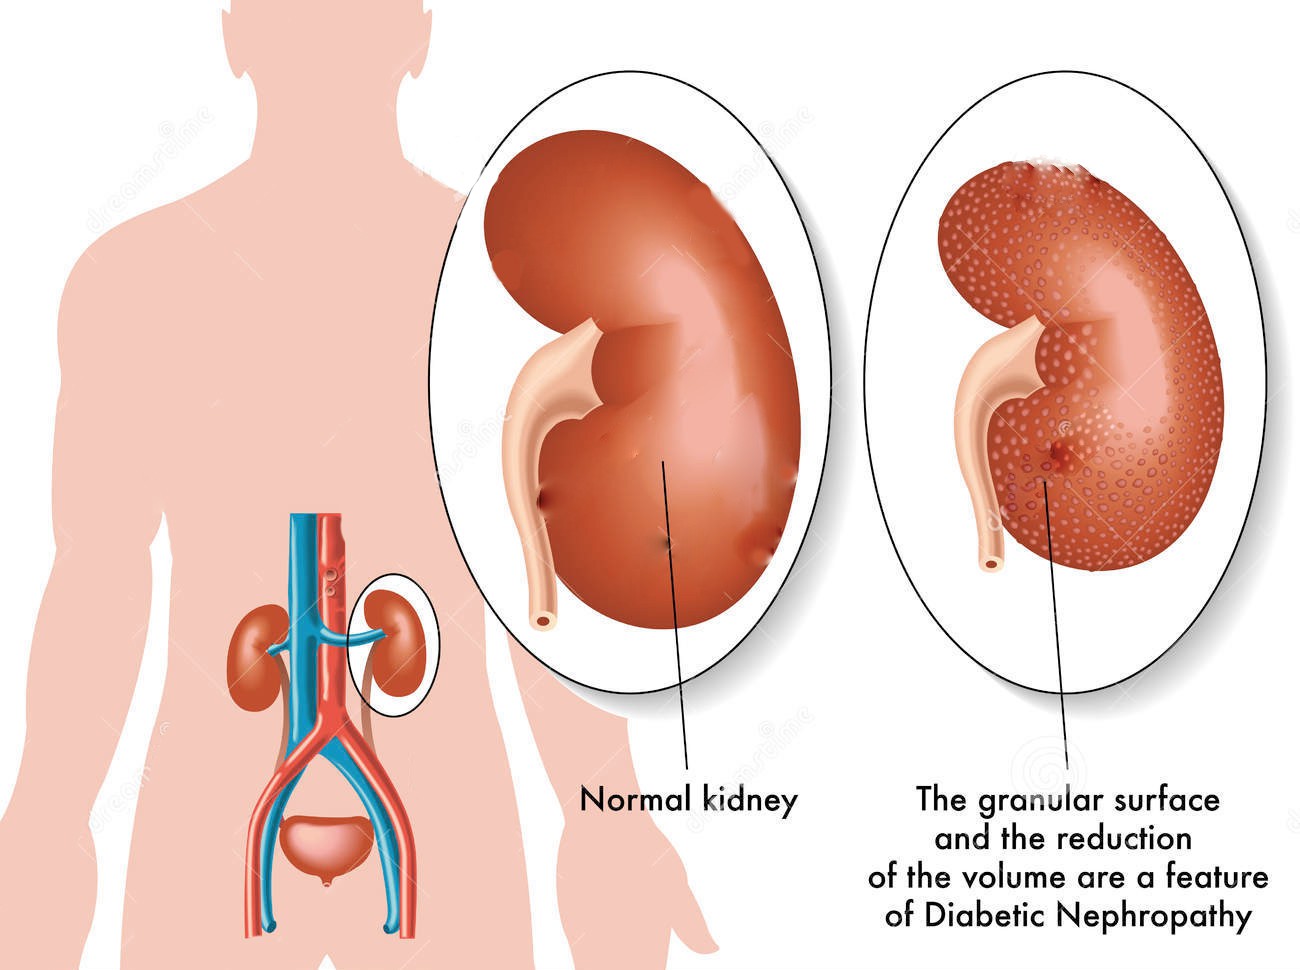 What are the clinical and biochemical characteristics of hội chứng thận hư (renal insufficiency syndrome)?